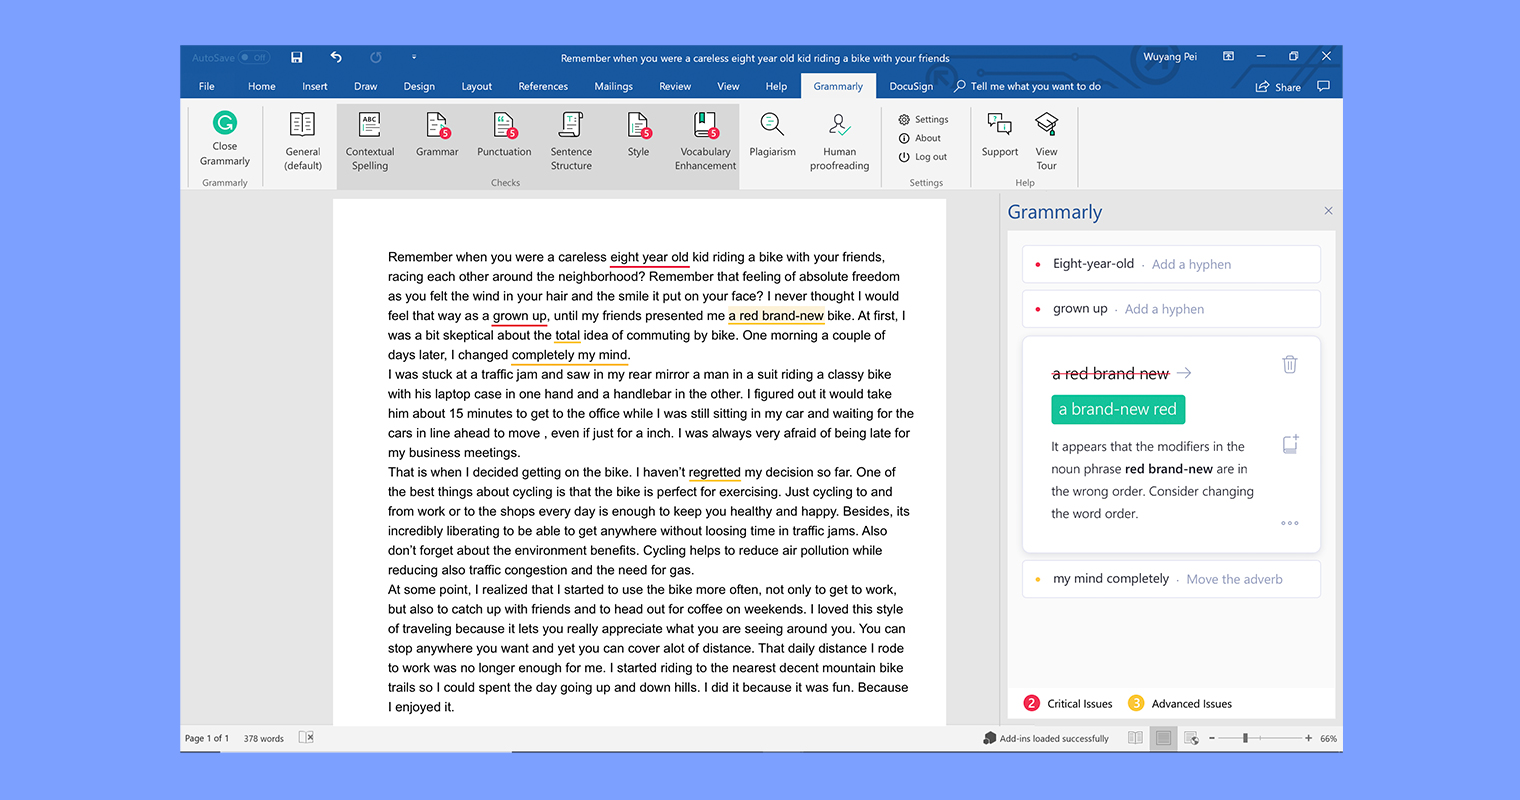 grammarly for word for mac